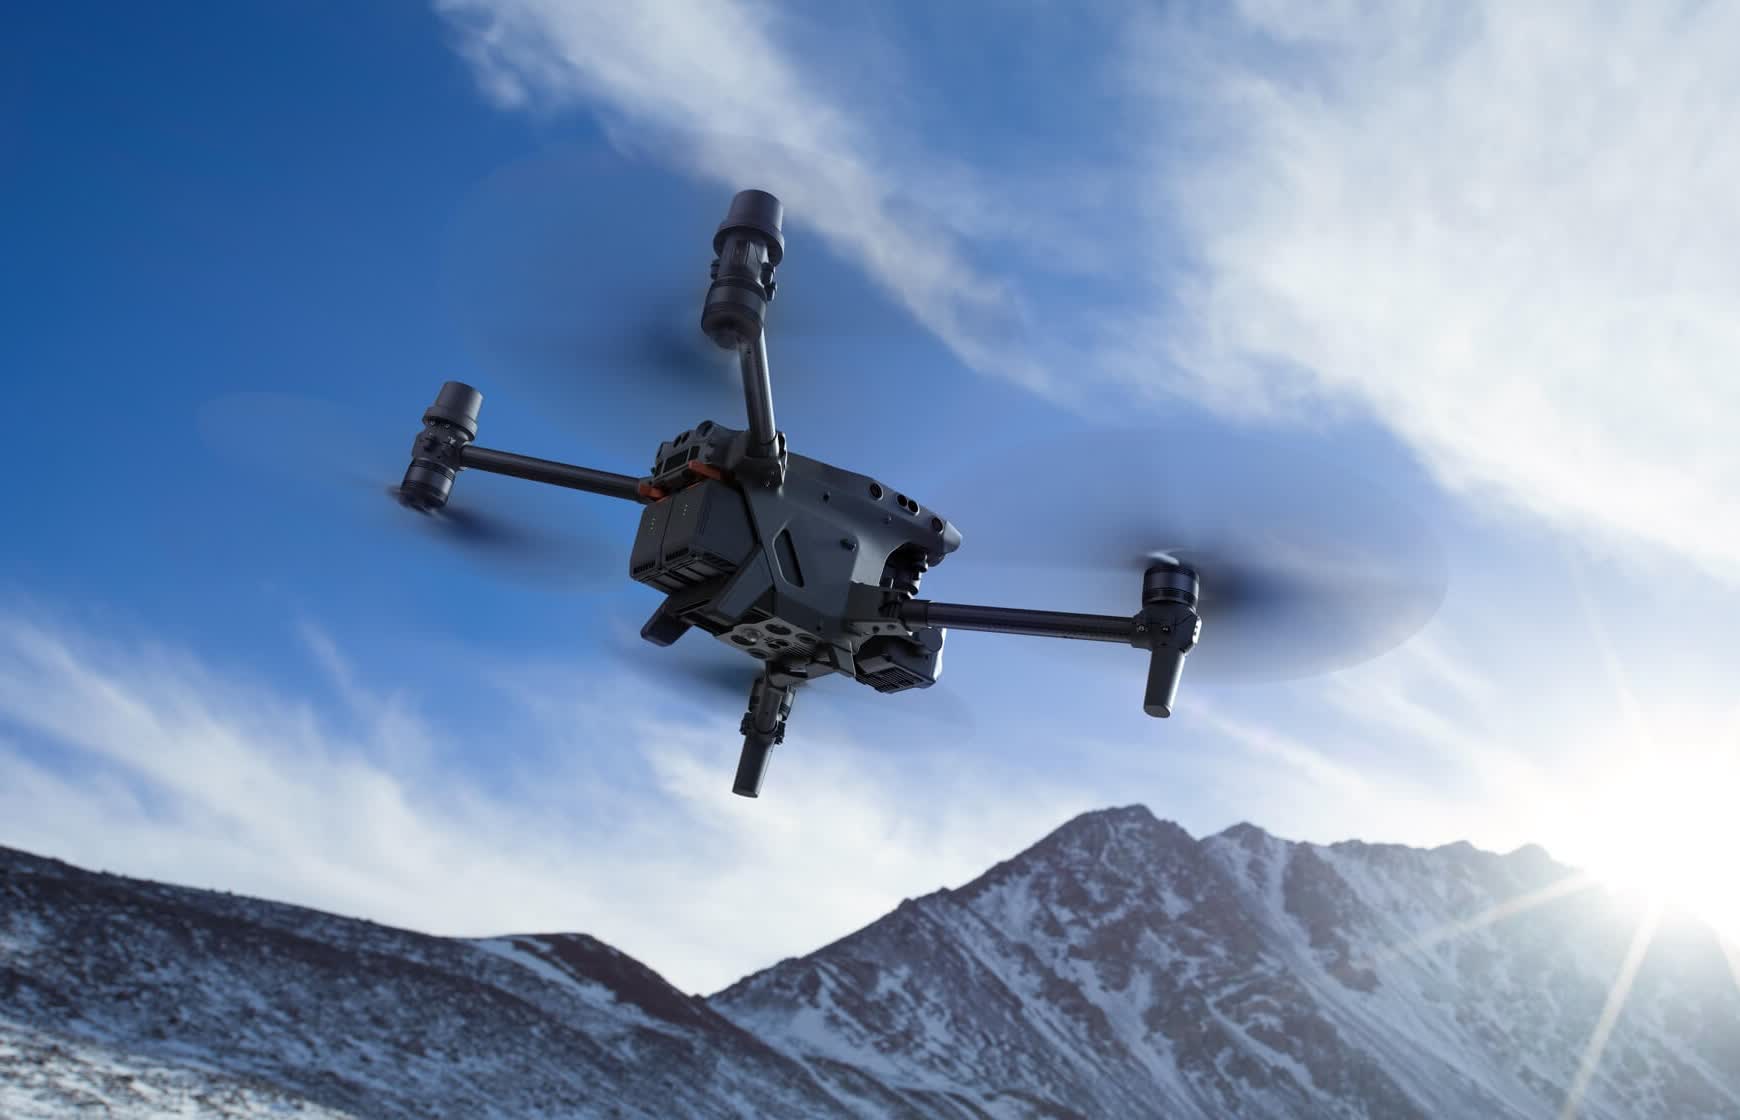 DJI's Matrice 30 is an enterprise-class drone with all the bells and whistles